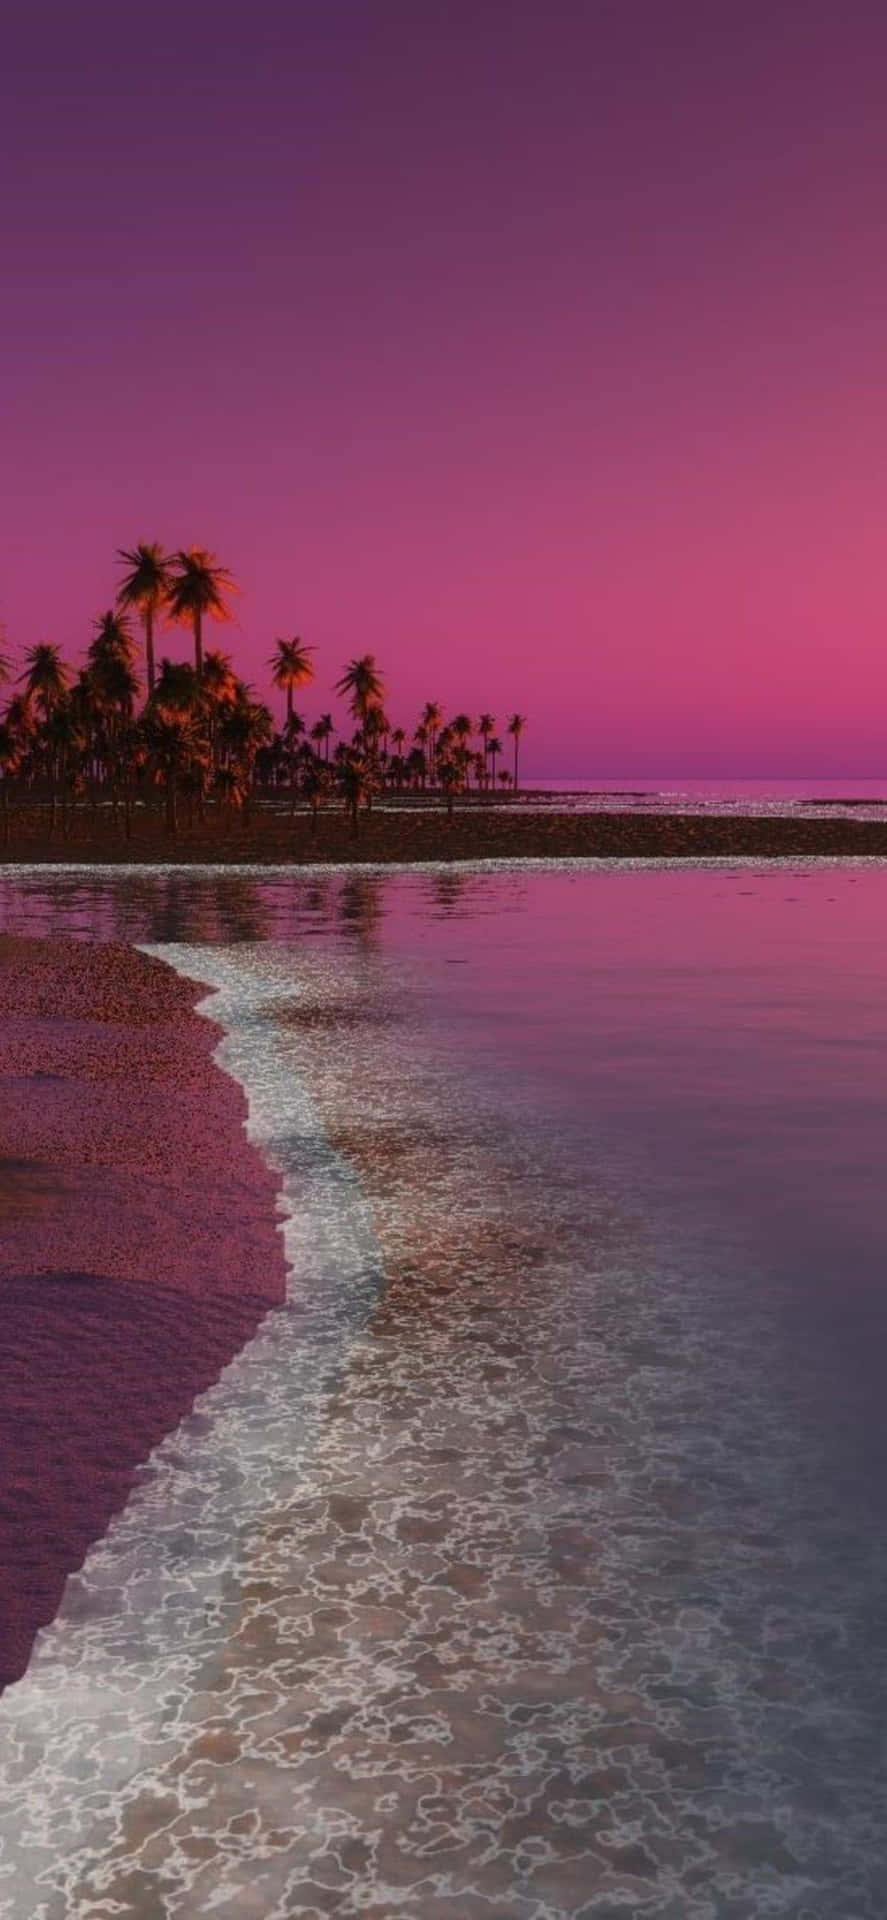 ____ Enjoy the beauty of a romantic sunset with your Aesthetic iPhone. Wallpaper